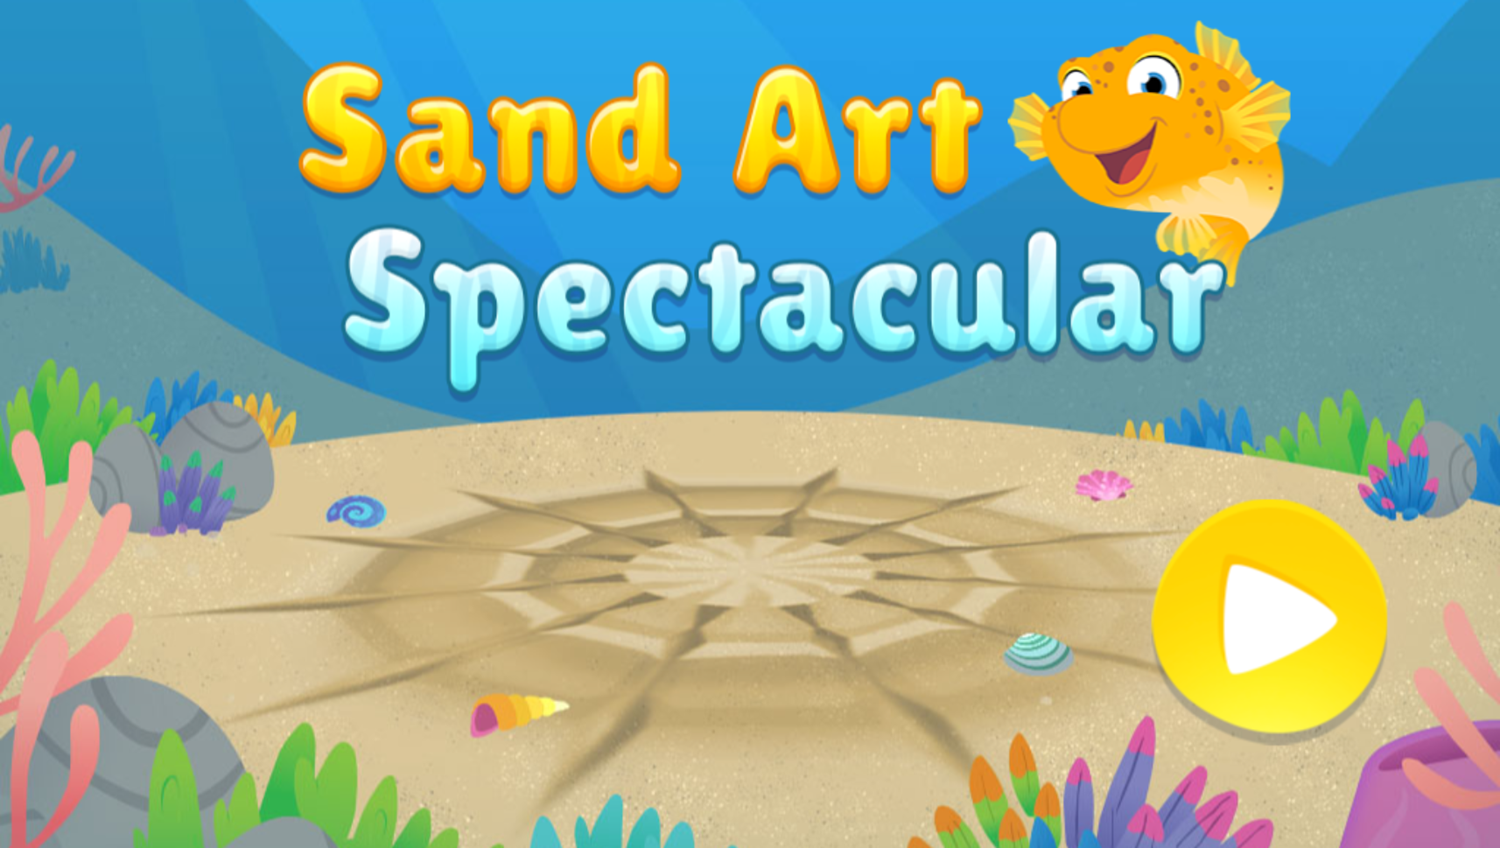 Splash and Bubbles Sand Art Spectacular Game Welcome Screen Screenshot.